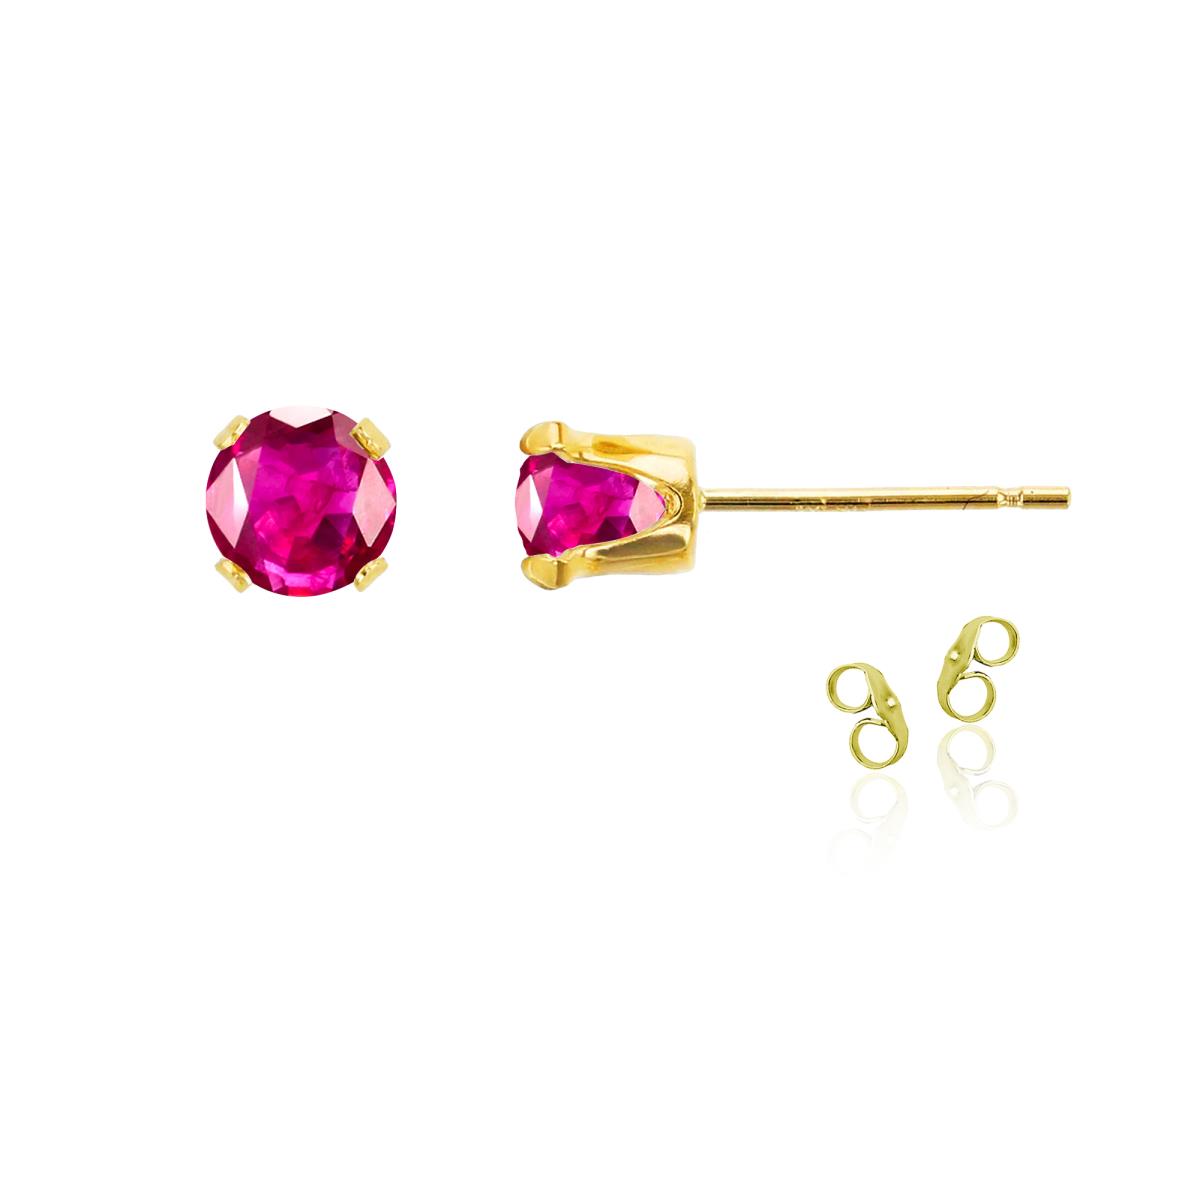 Sterling Silver Yellow 5mm Round Ruby Stud Earring with Clutch